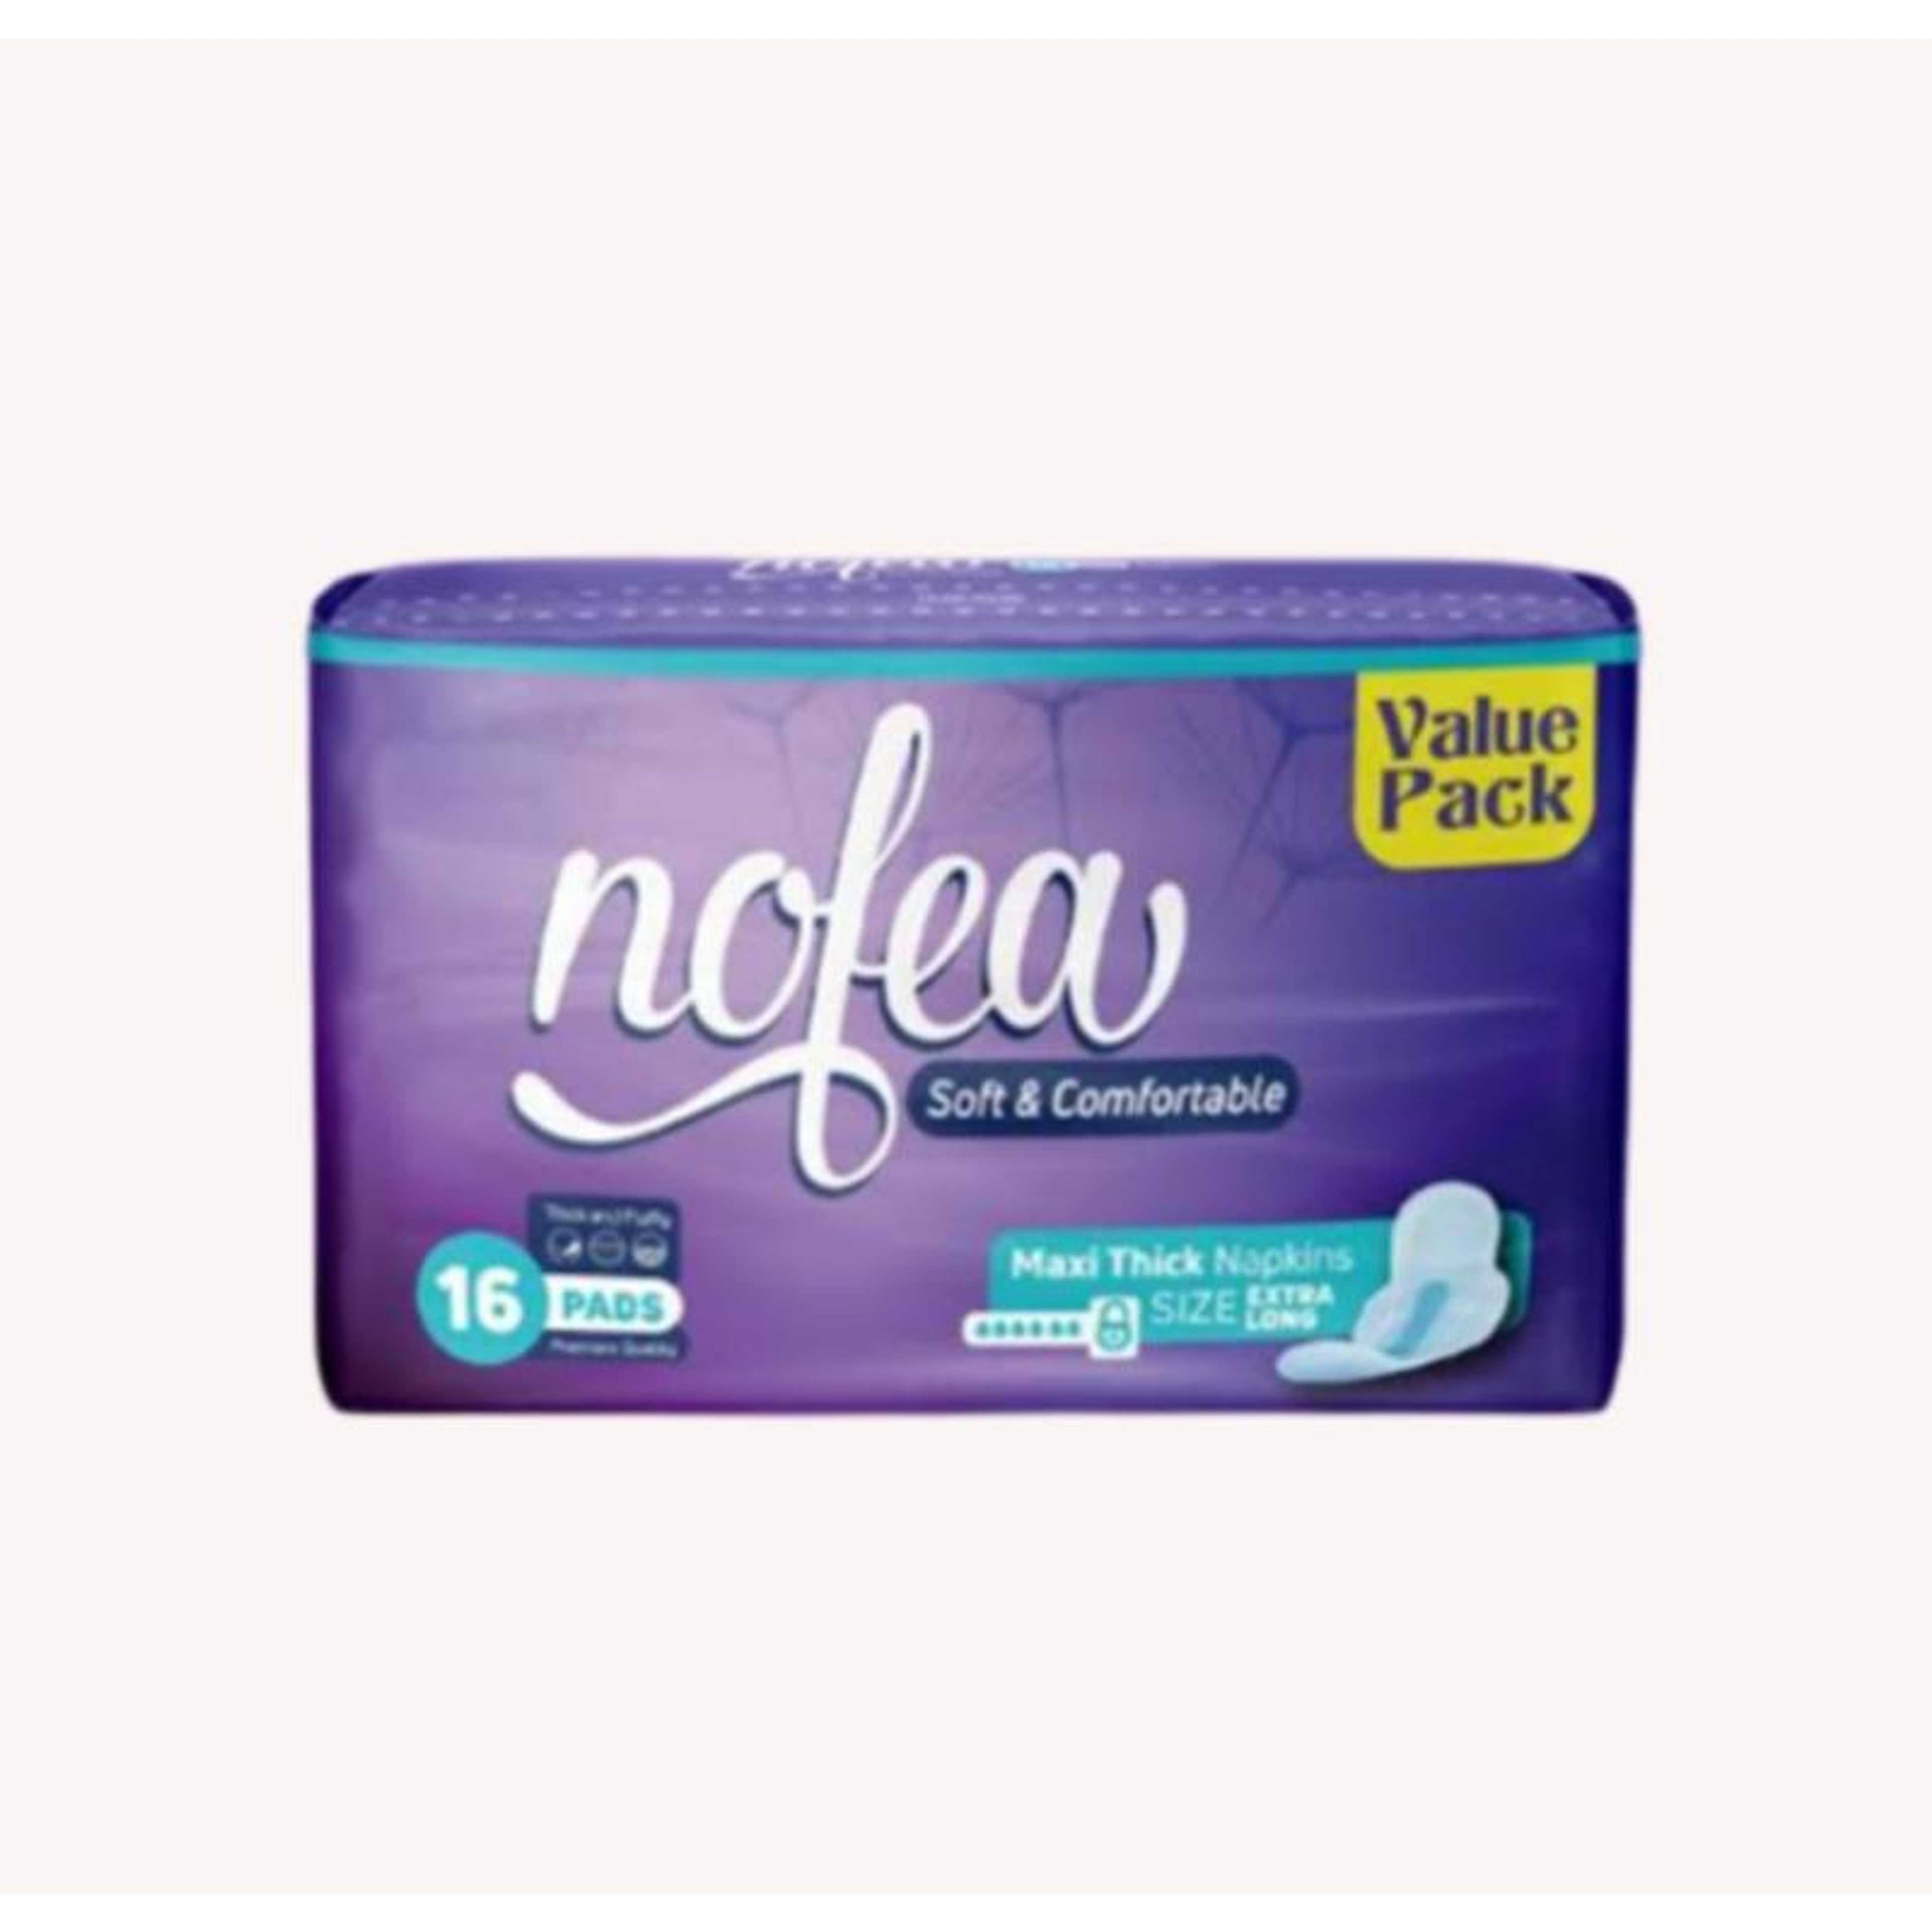 NOFEA PADS Maxi Thick Sanitary Napkin Size EXTRA Long - 16pads